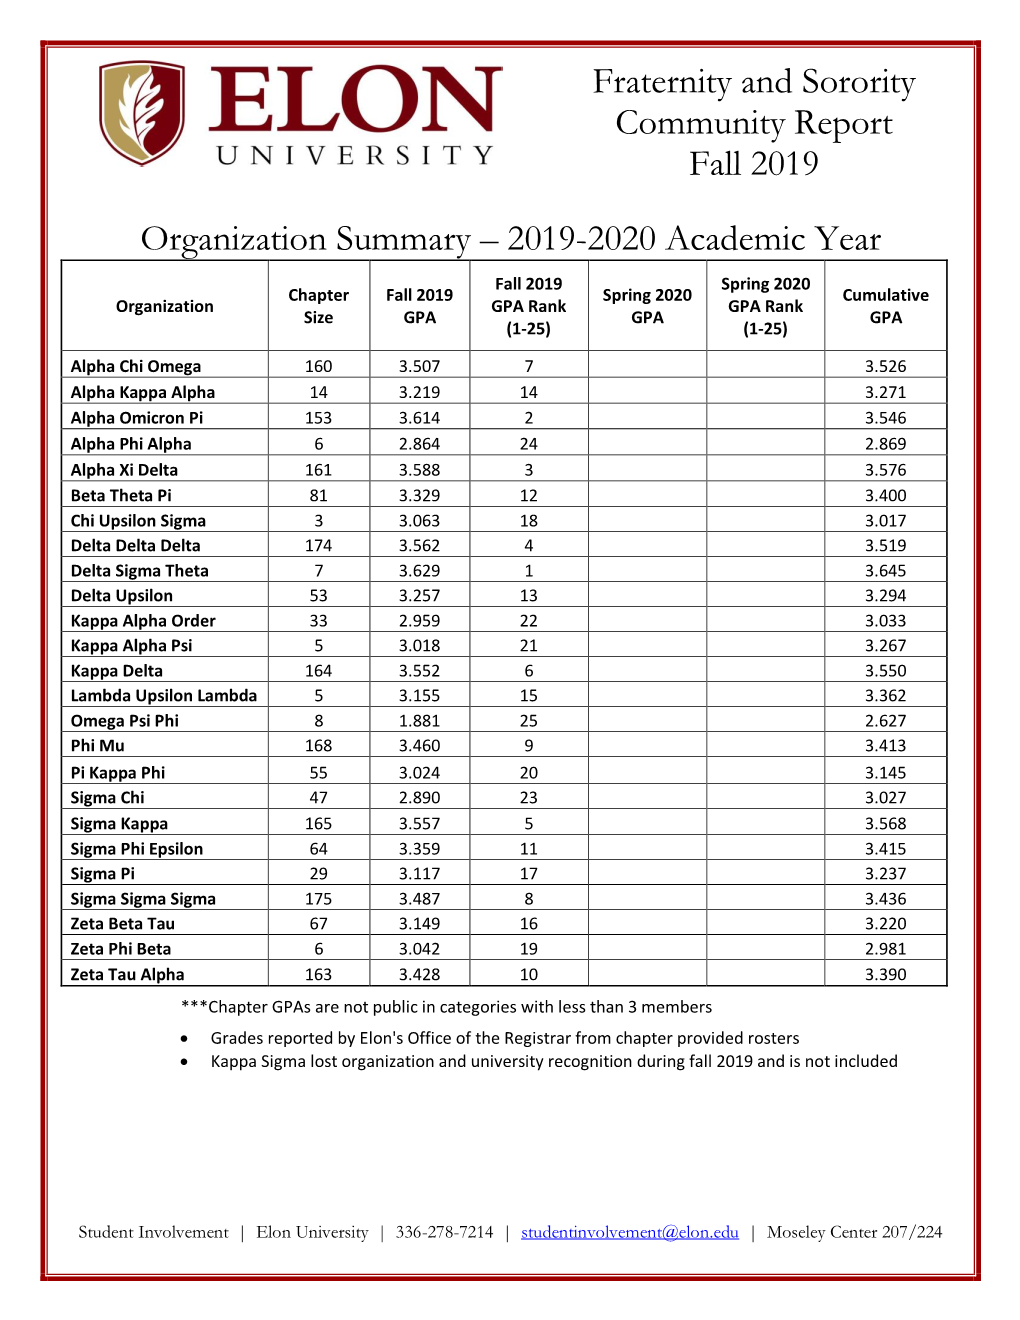 Fraternity and Sorority Community Report Fall 2019